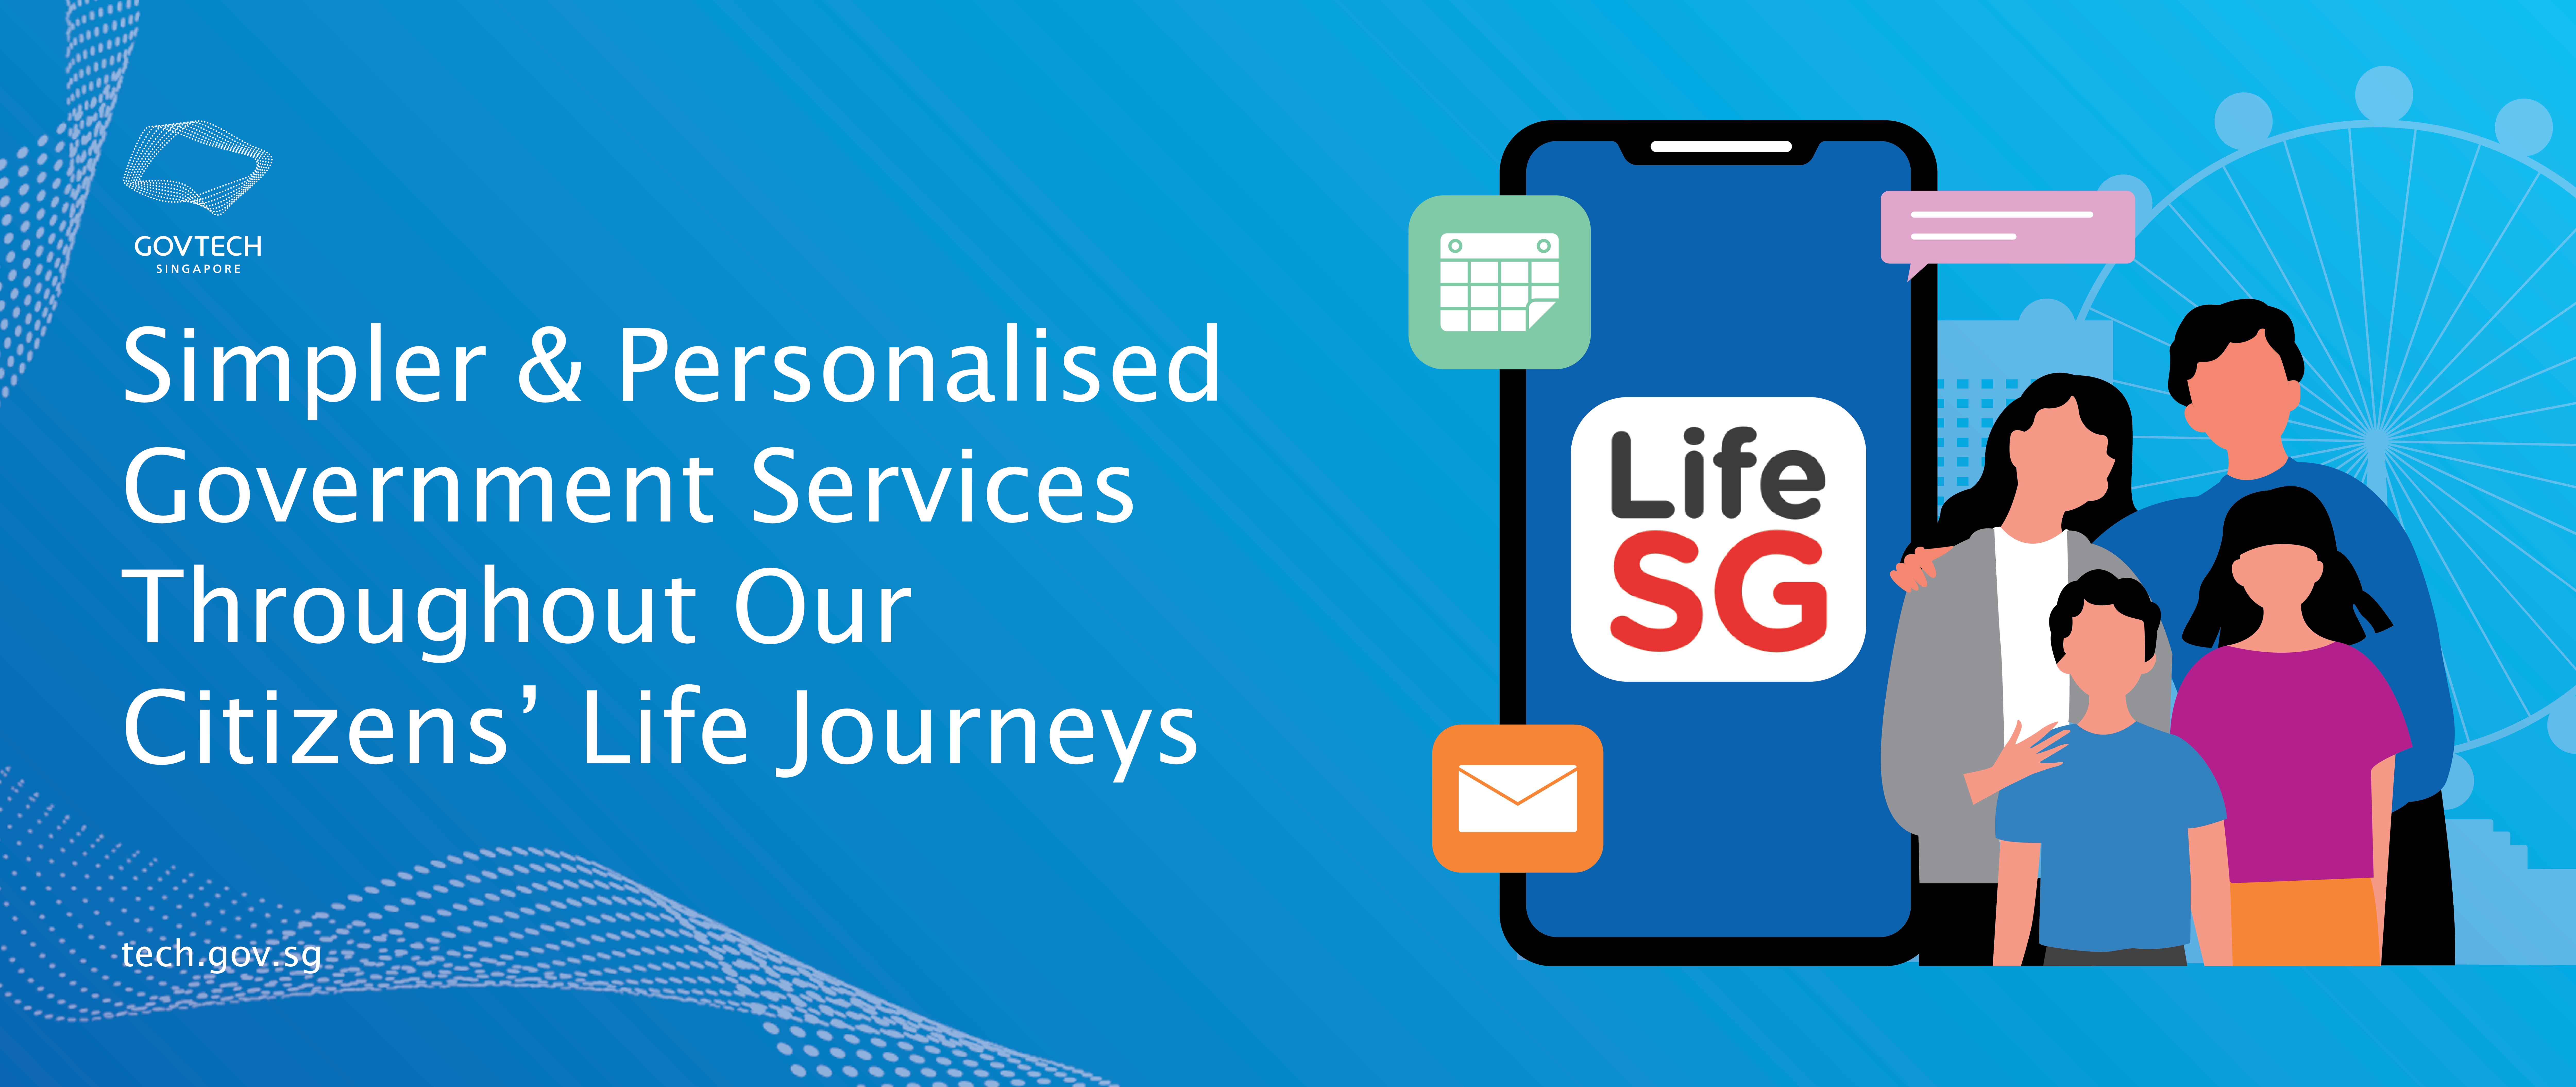 Simpler & Personalised Government Services Throughout Our Citizens' Life Journeys